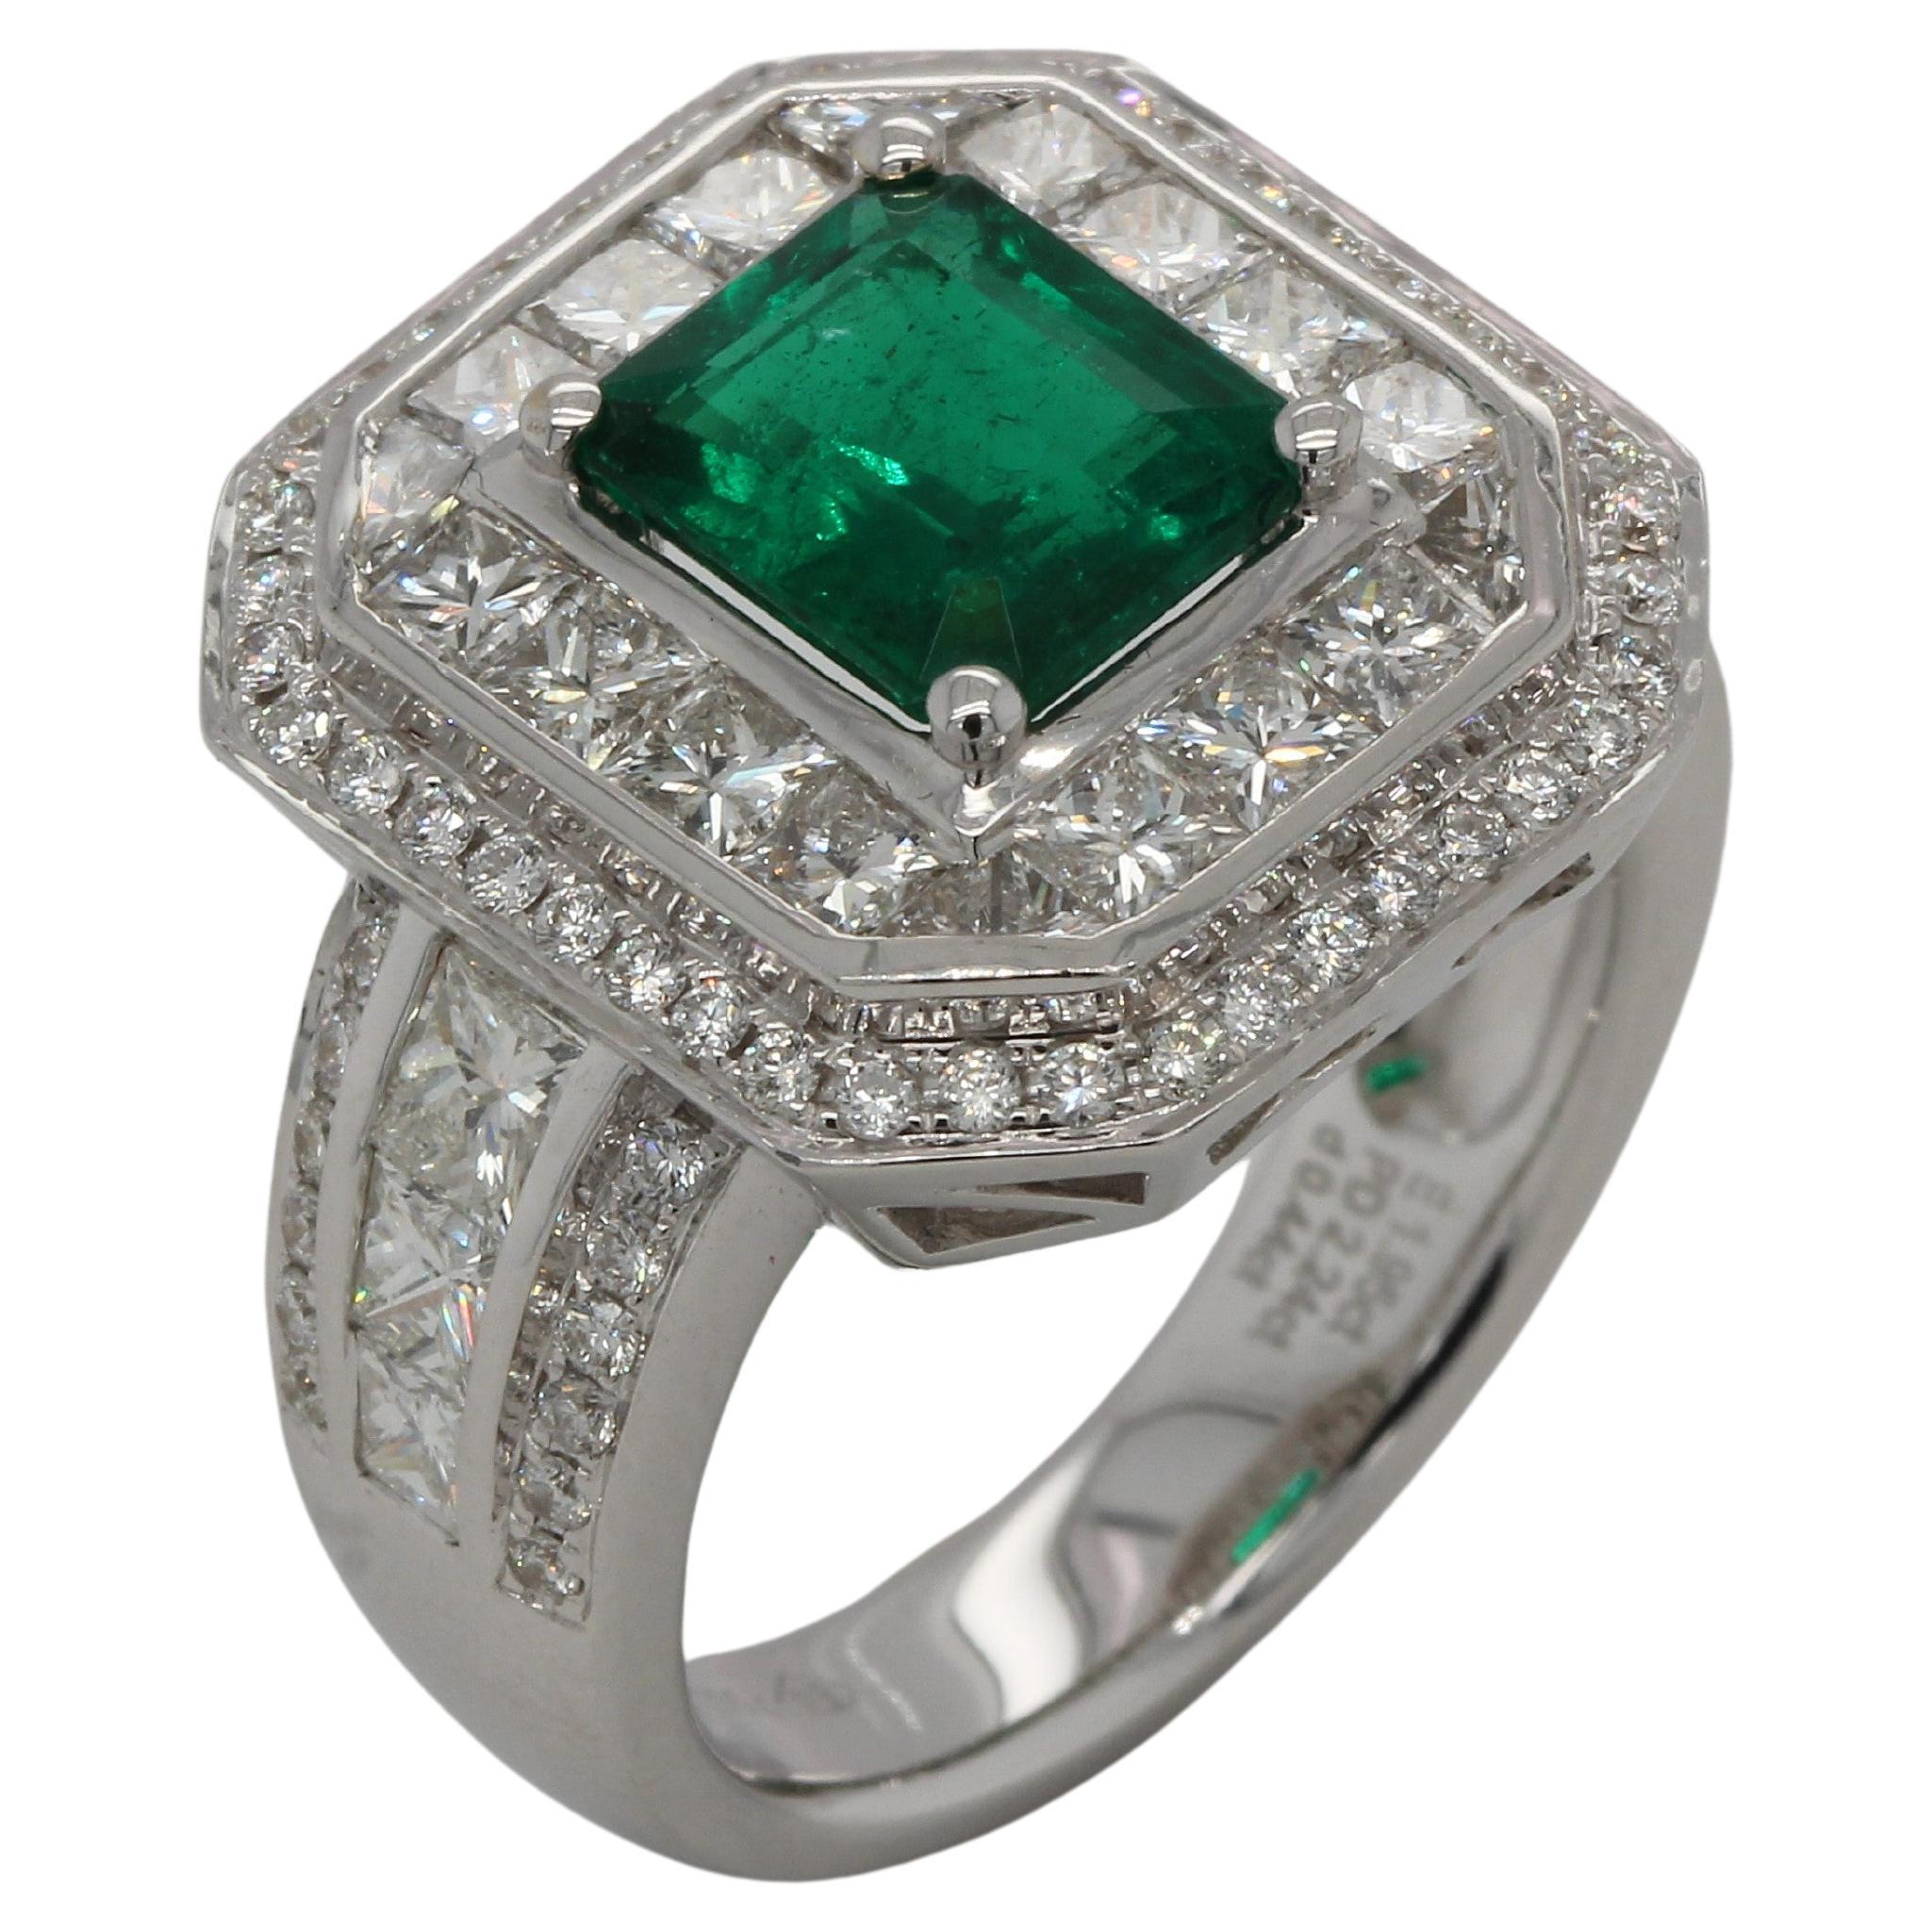 This emerald and diamond ring is truly an object of luxury. Featuring an impressive 1.95 carat emerald set with sparkling white diamonds, it is a statement piece that is sure to get you noticed. This exclusive emerald and diamond ring was made with